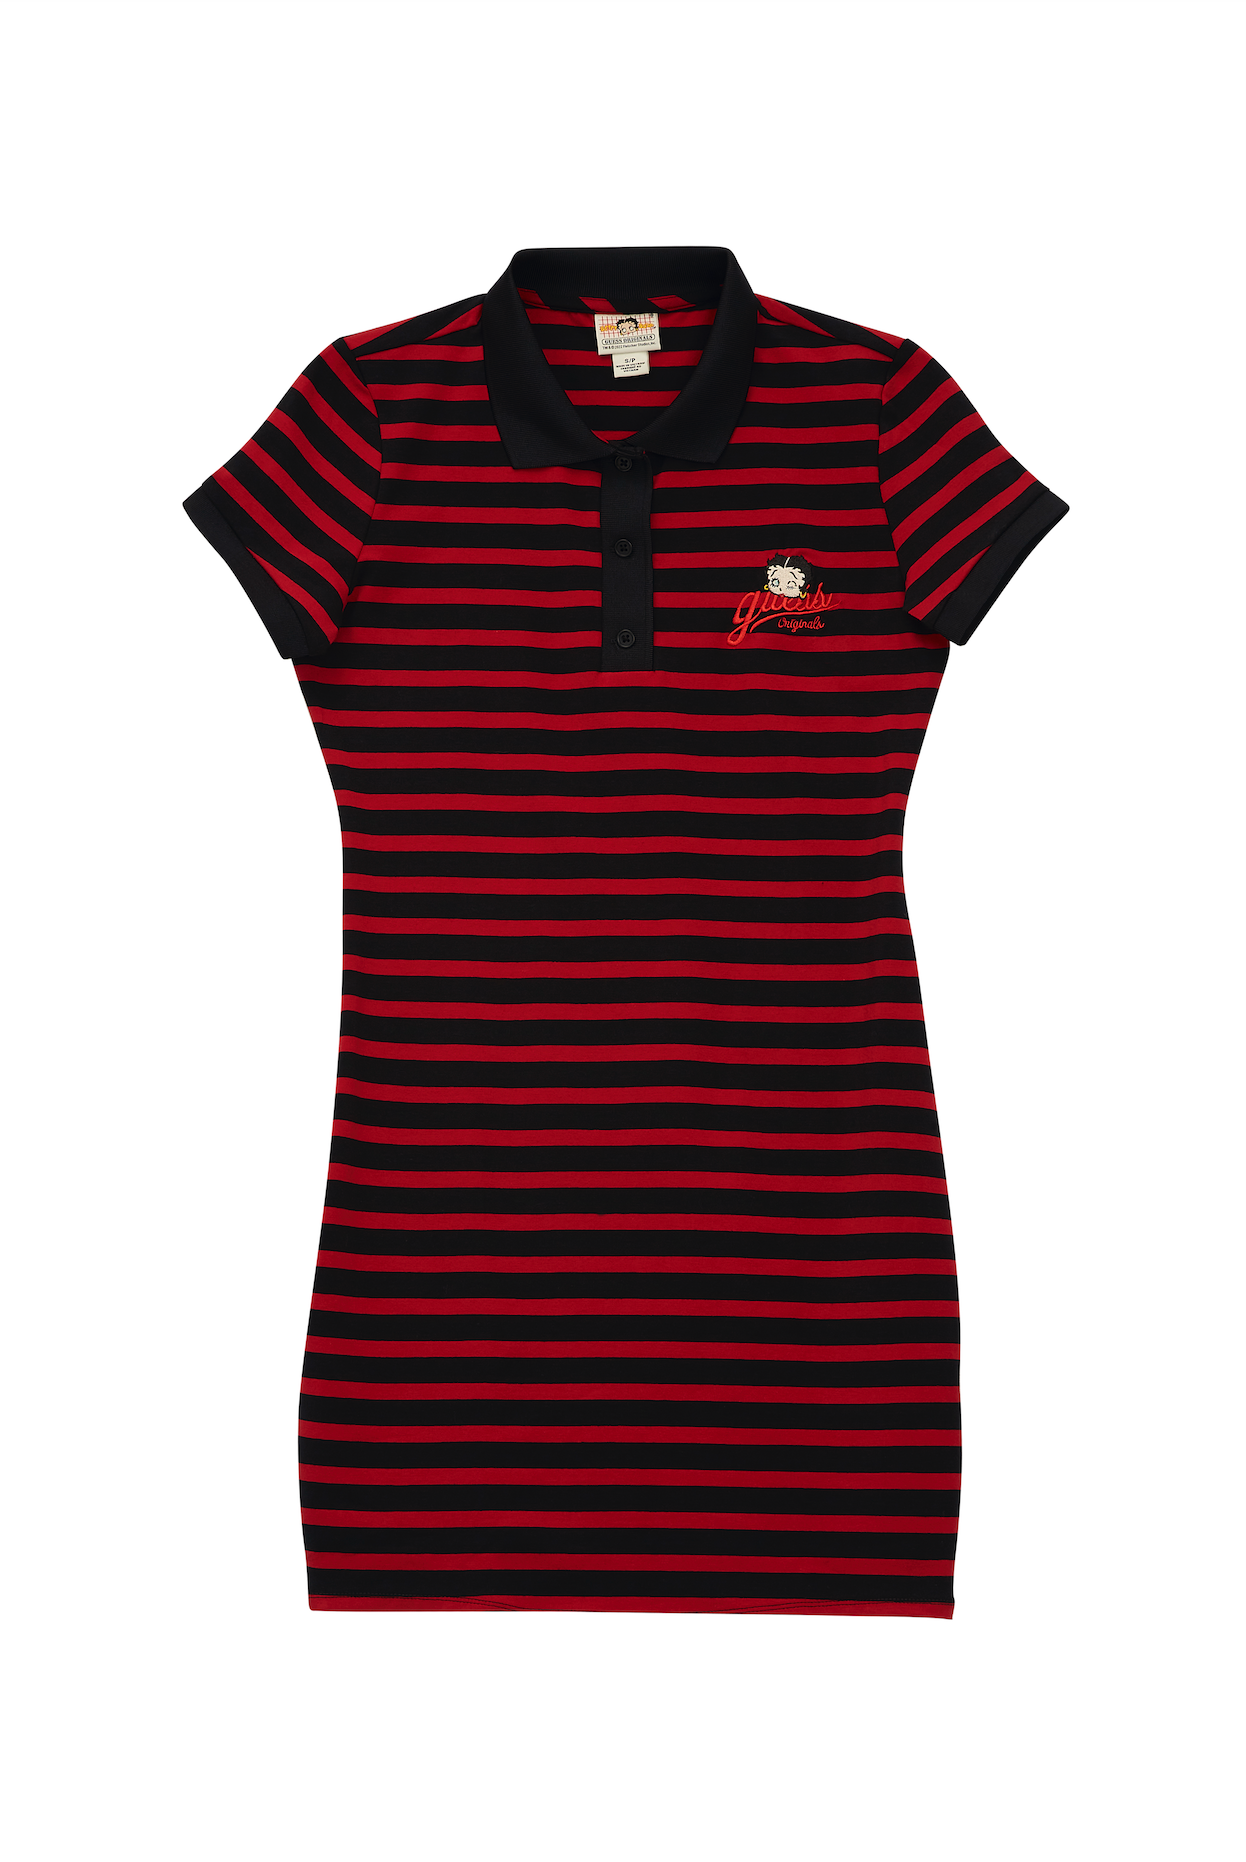 A striped dress with a Betty Boop logo on one breast